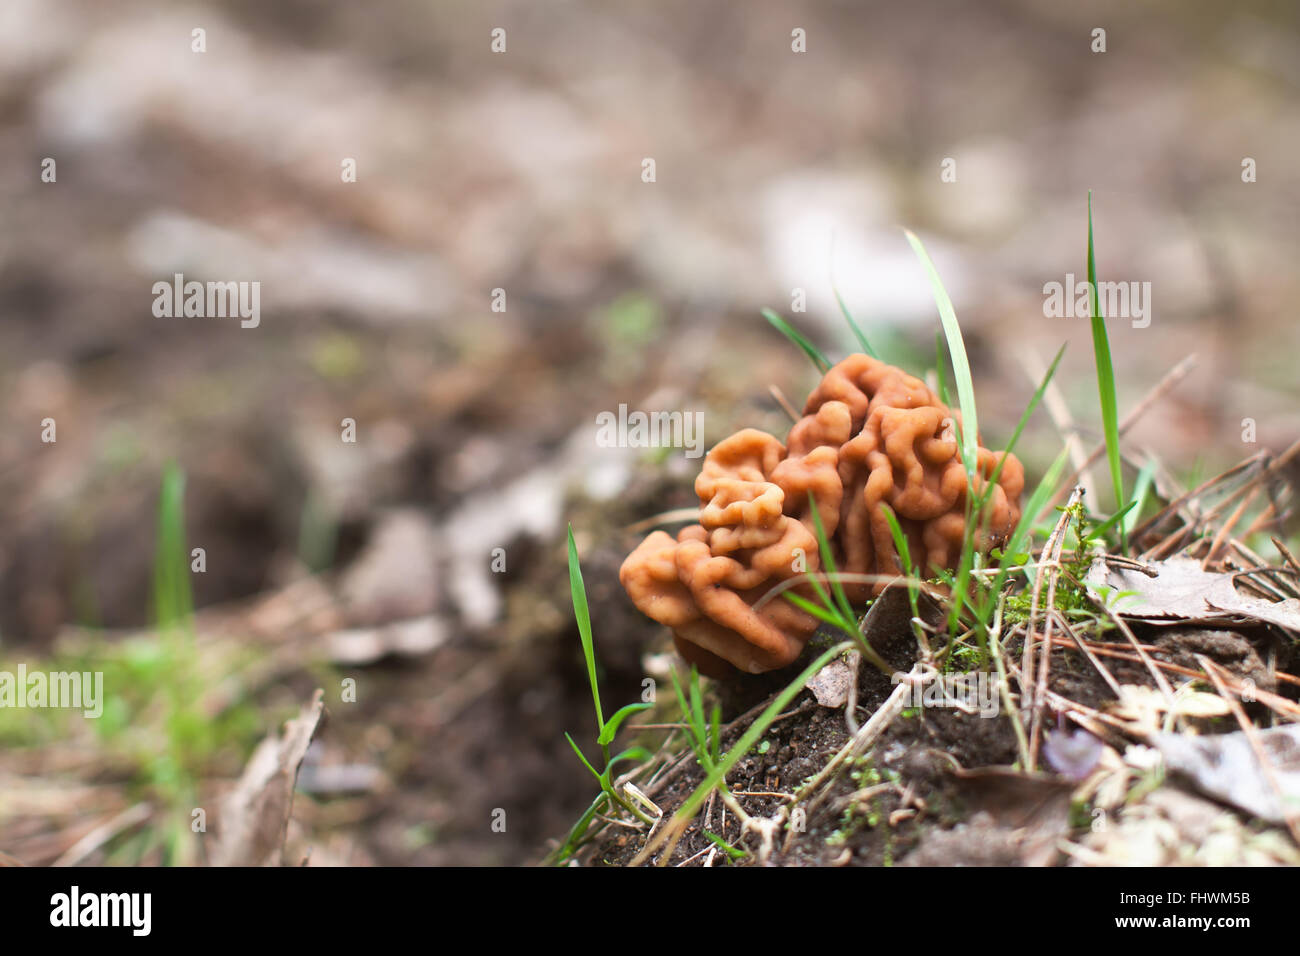 While many people eat false morels without apparent harm, some people have developed acute toxicity and recent evidence suggests Stock Photo